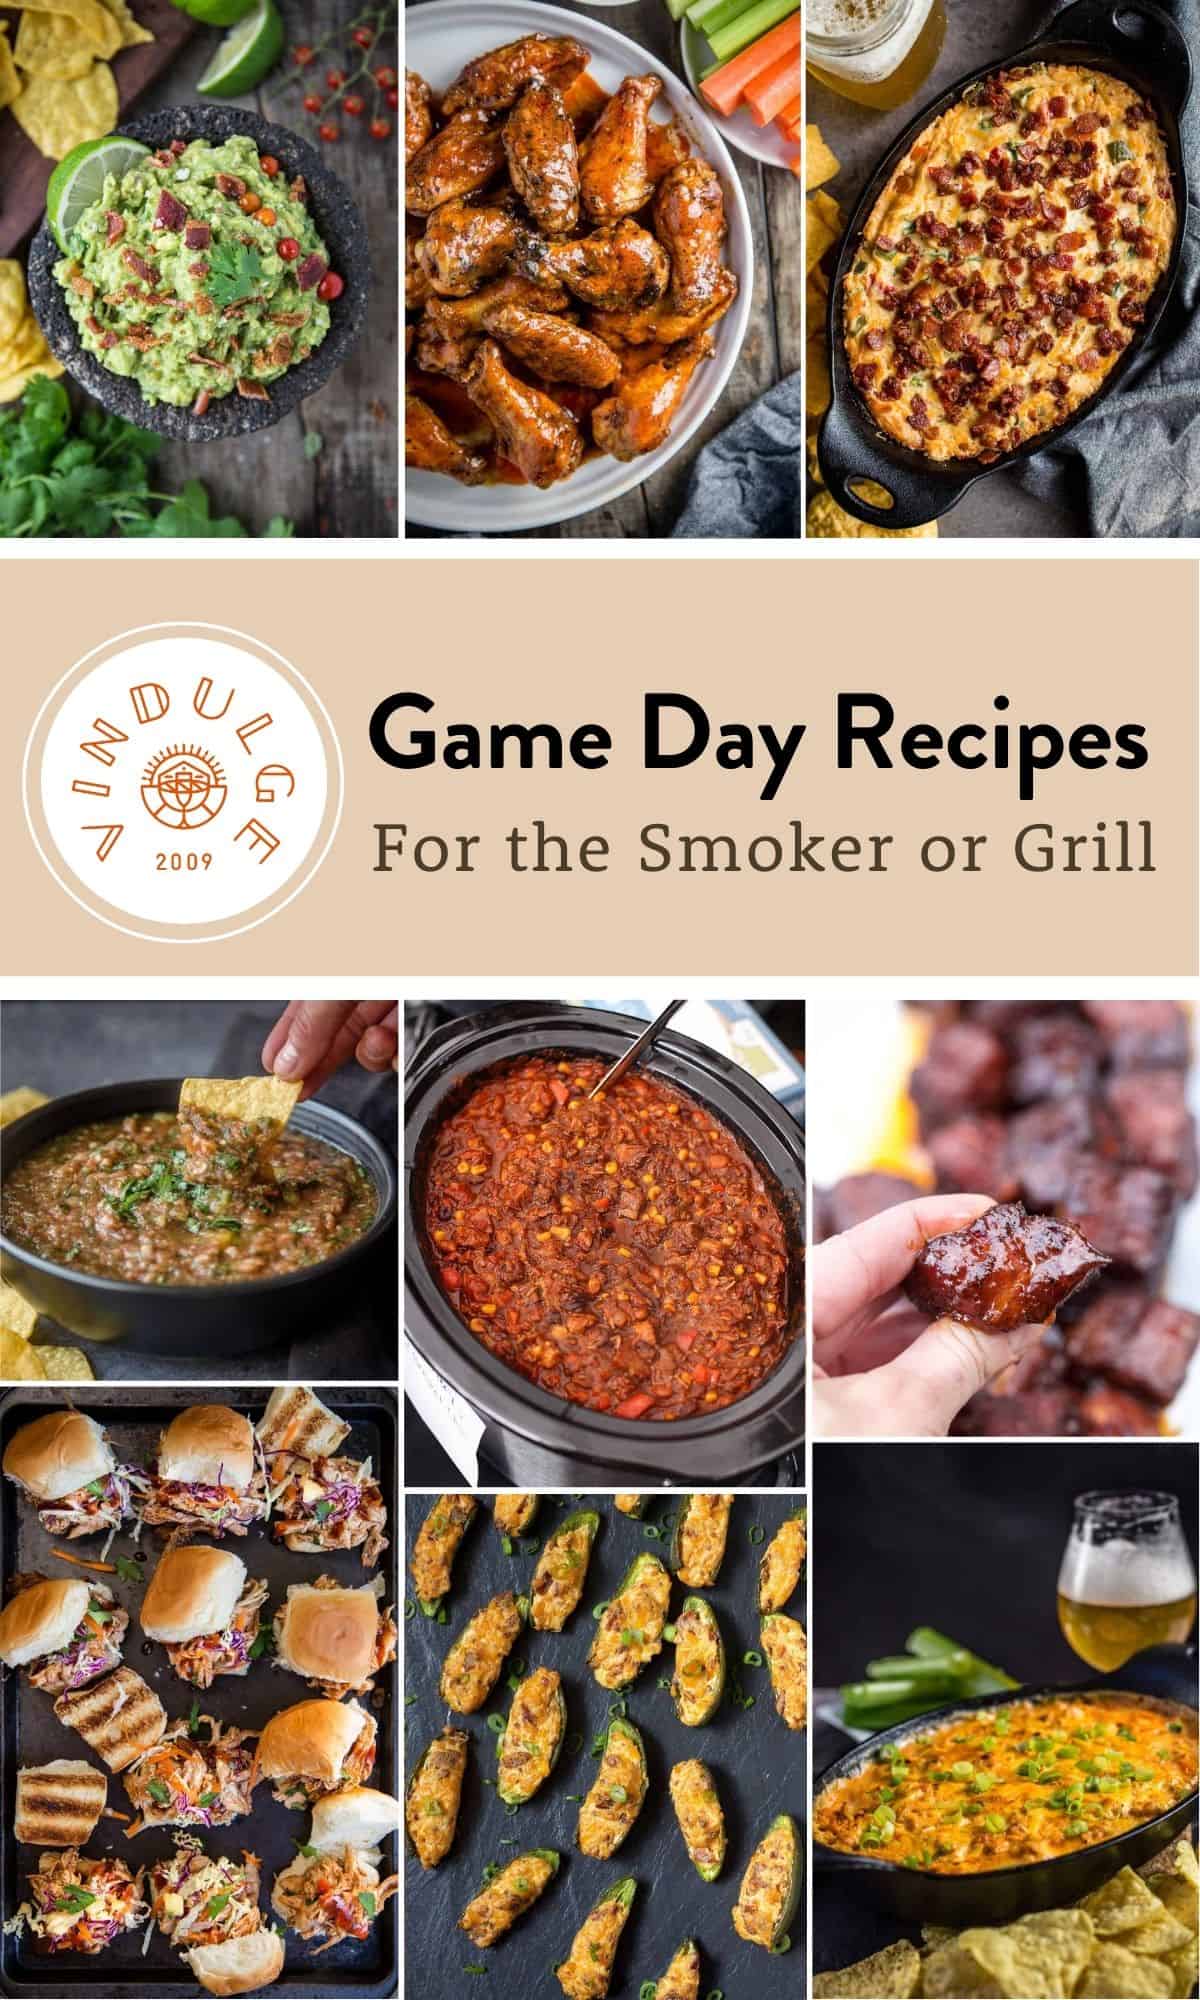 20 Winning Recipes for Game Day Party Food